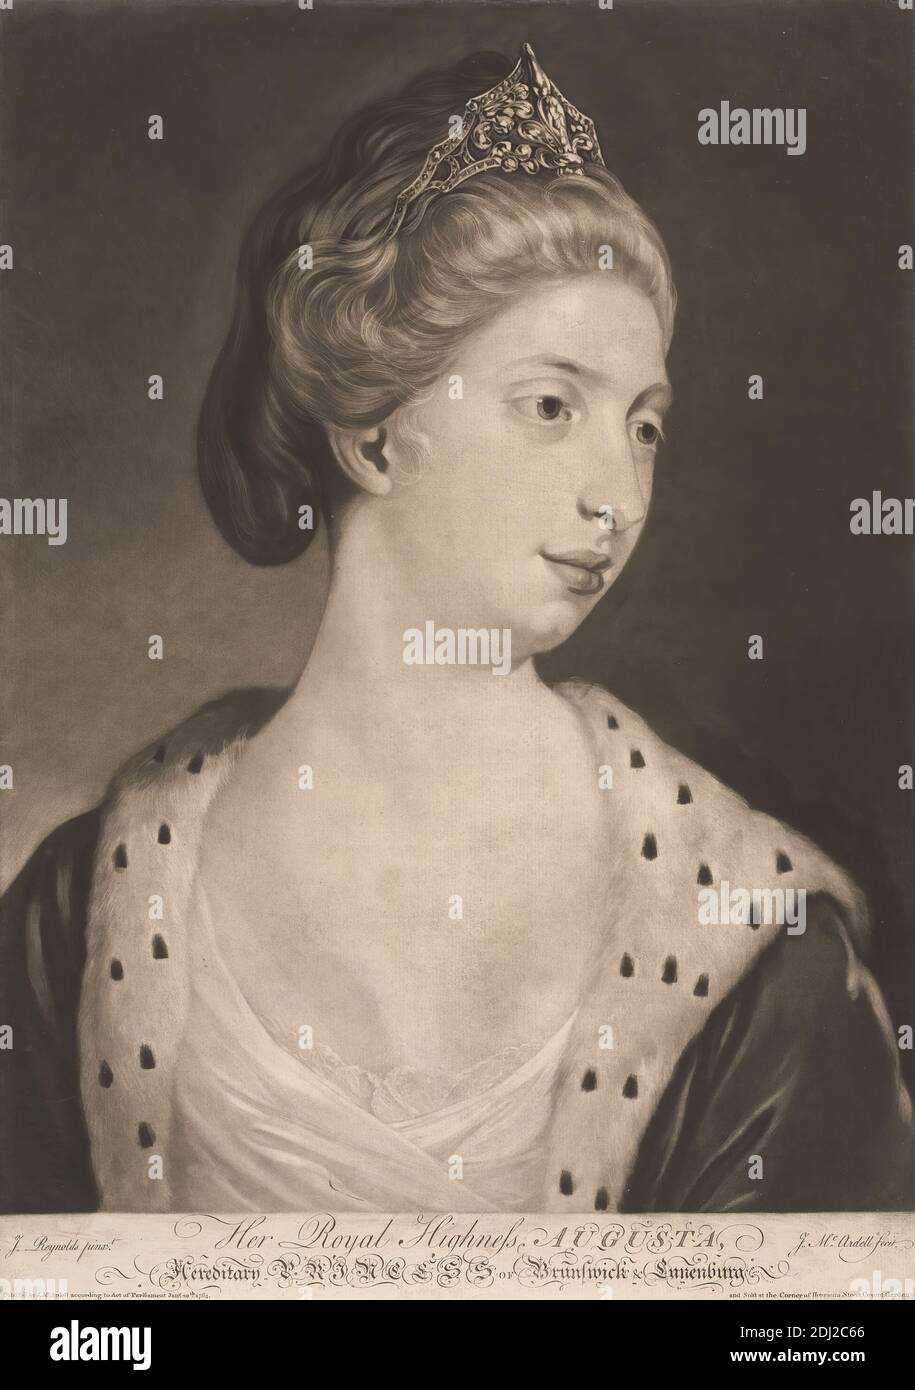 Her Royal Highness, Augusta, Hereditary Princess of Brunswick and Lunenburg, James McArdell, ca. 1729–1765, Irish, after Sir Joshua Reynolds RA, 1723–1792, British, 1764, Mezzotint, Sheet: 19 11/16 x 13 15/16 inches (50 x 35.4 cm) and Frame: 29 1/4 x 23 5/16 inches (74.3 x 59.2 cm), portrait Stock Photo